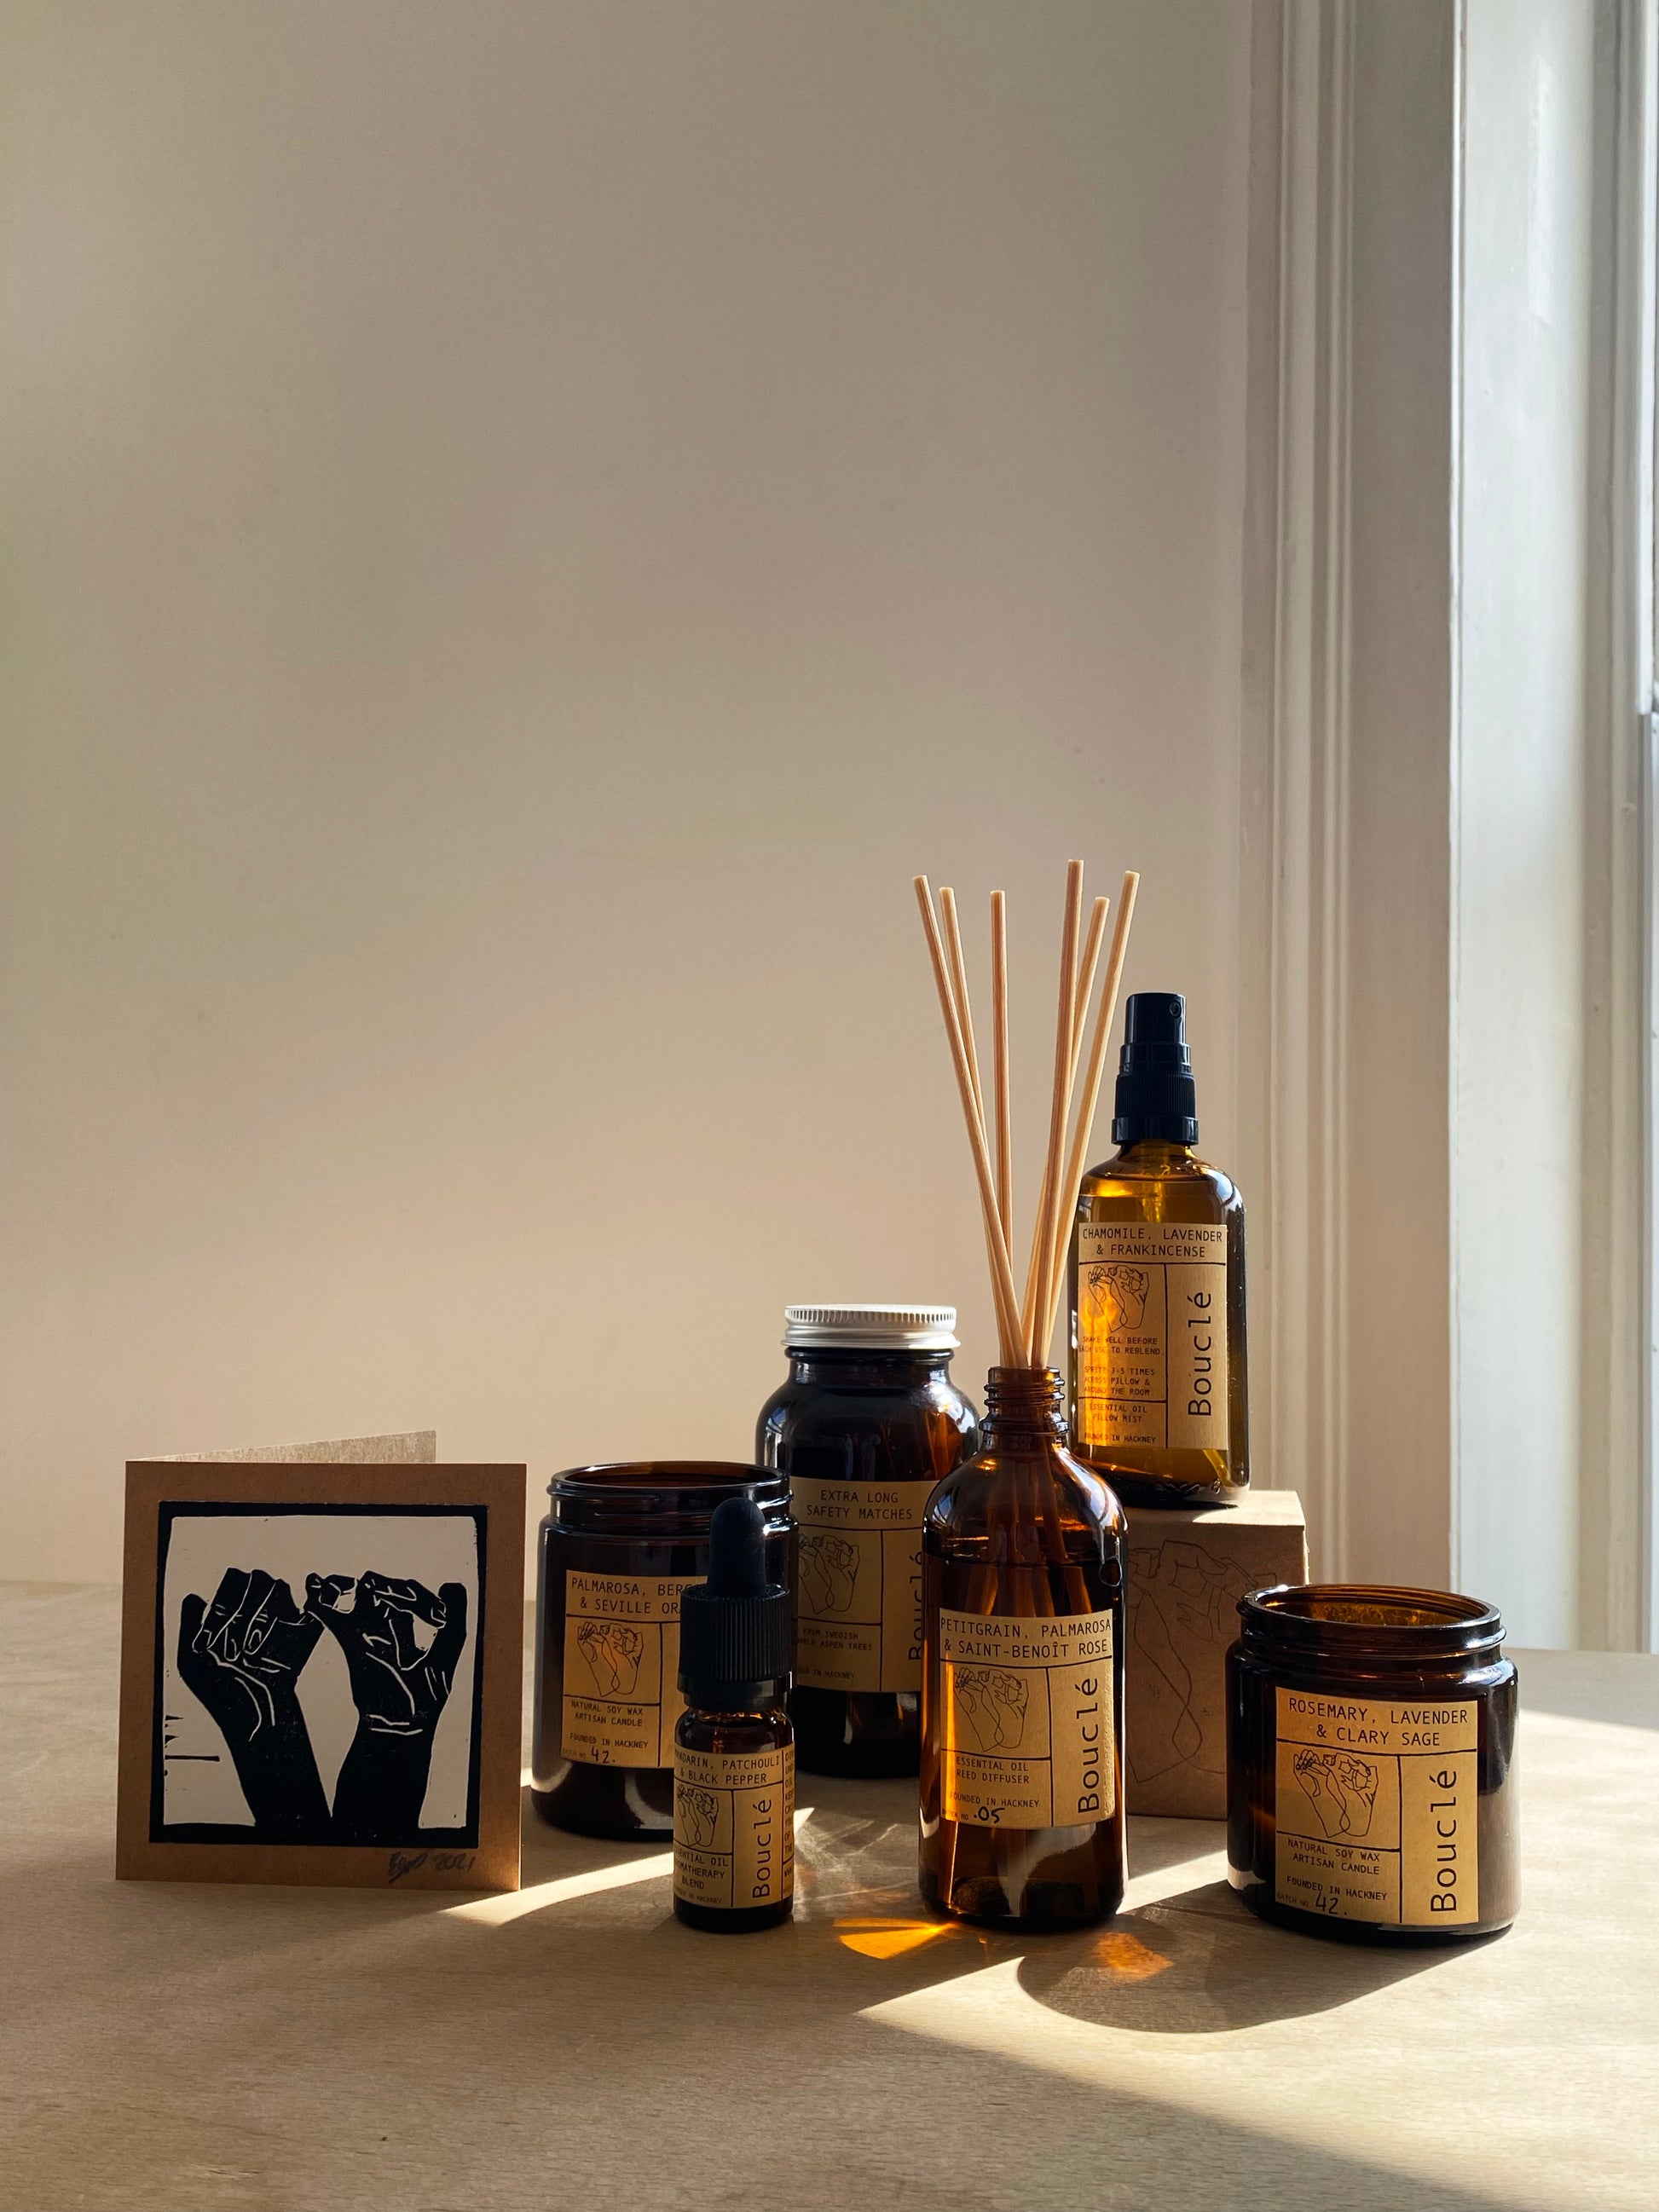 Essential oil based natural products to scent your home made in the UK by Bouclé. In the image are soy candles, extra long matches, pillow spray, room spray, rattan reed diffuser and essential oil blends. 